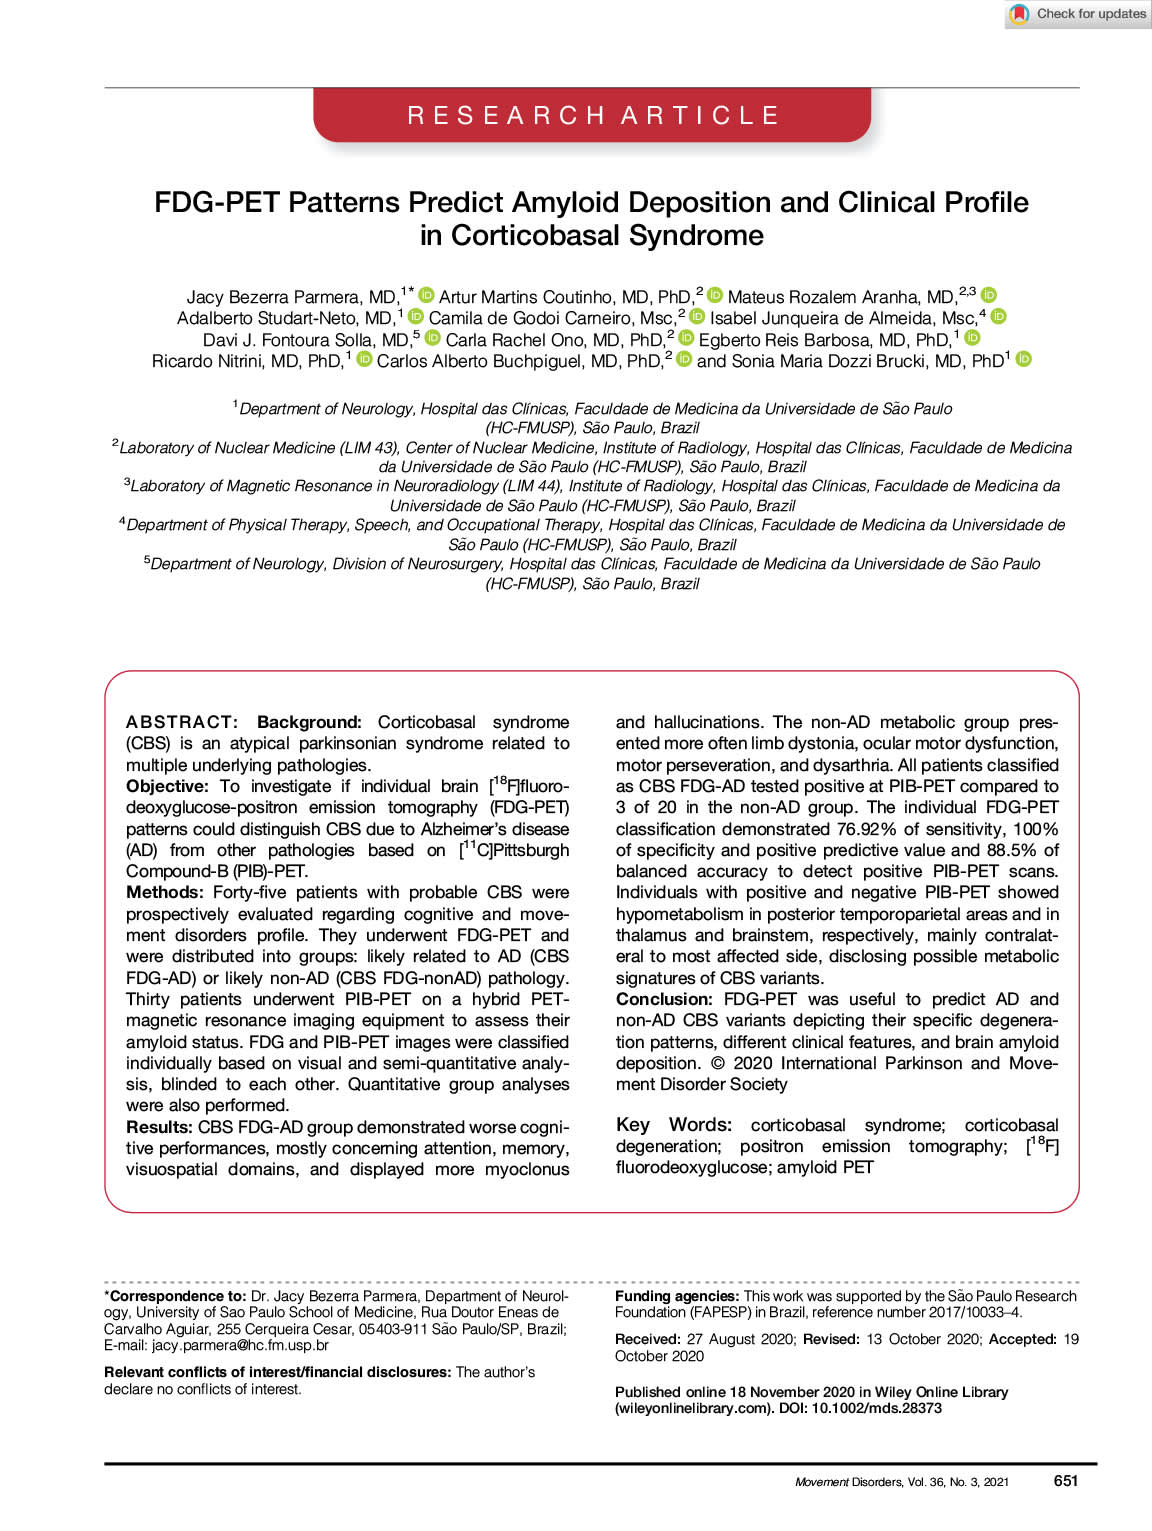 Fdg Pet Can Distinguish Ad From Non Ad Variants Of Corticobasal Syndrome By Degeneration Patterns Clinical Features And Brain Amyloid Deposition Neurodiem